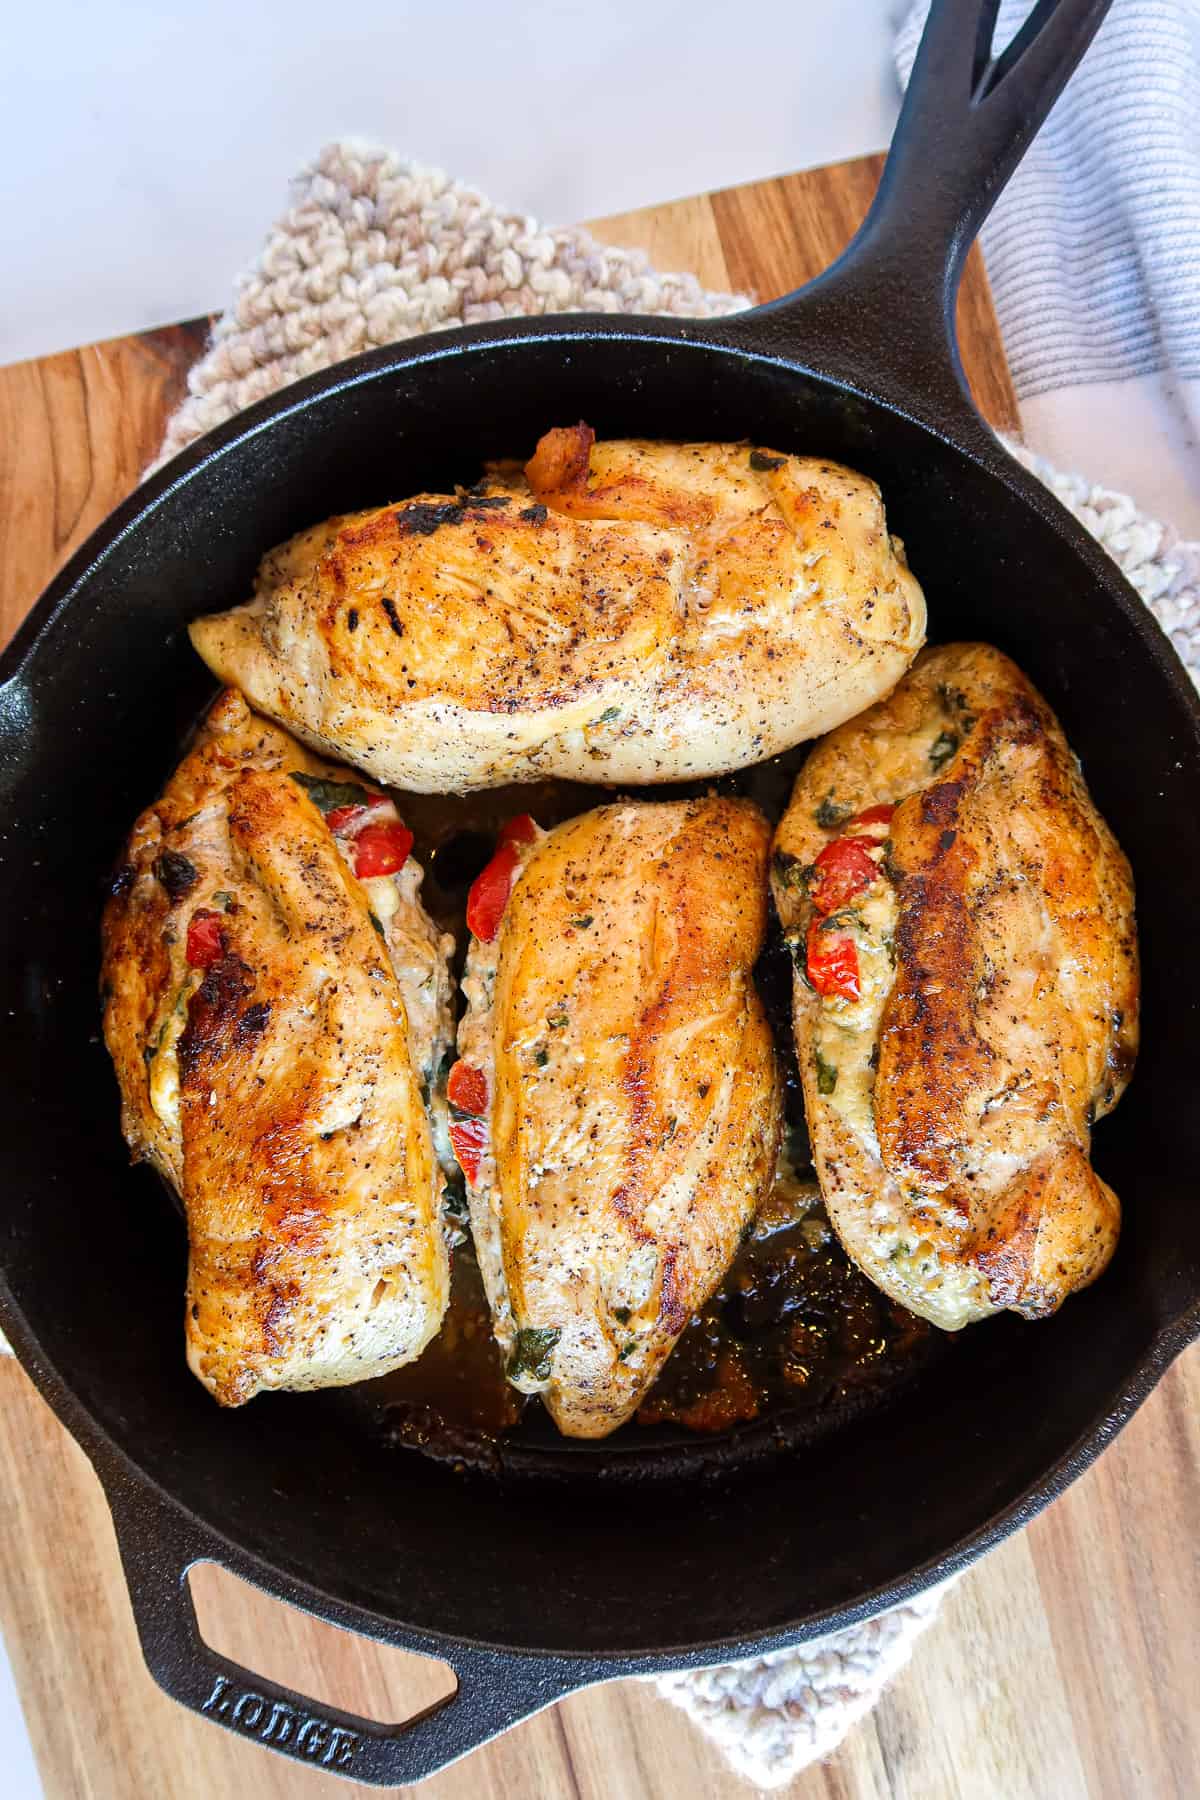 Chicken breasts stuffed with spinach and blue cheese filling.